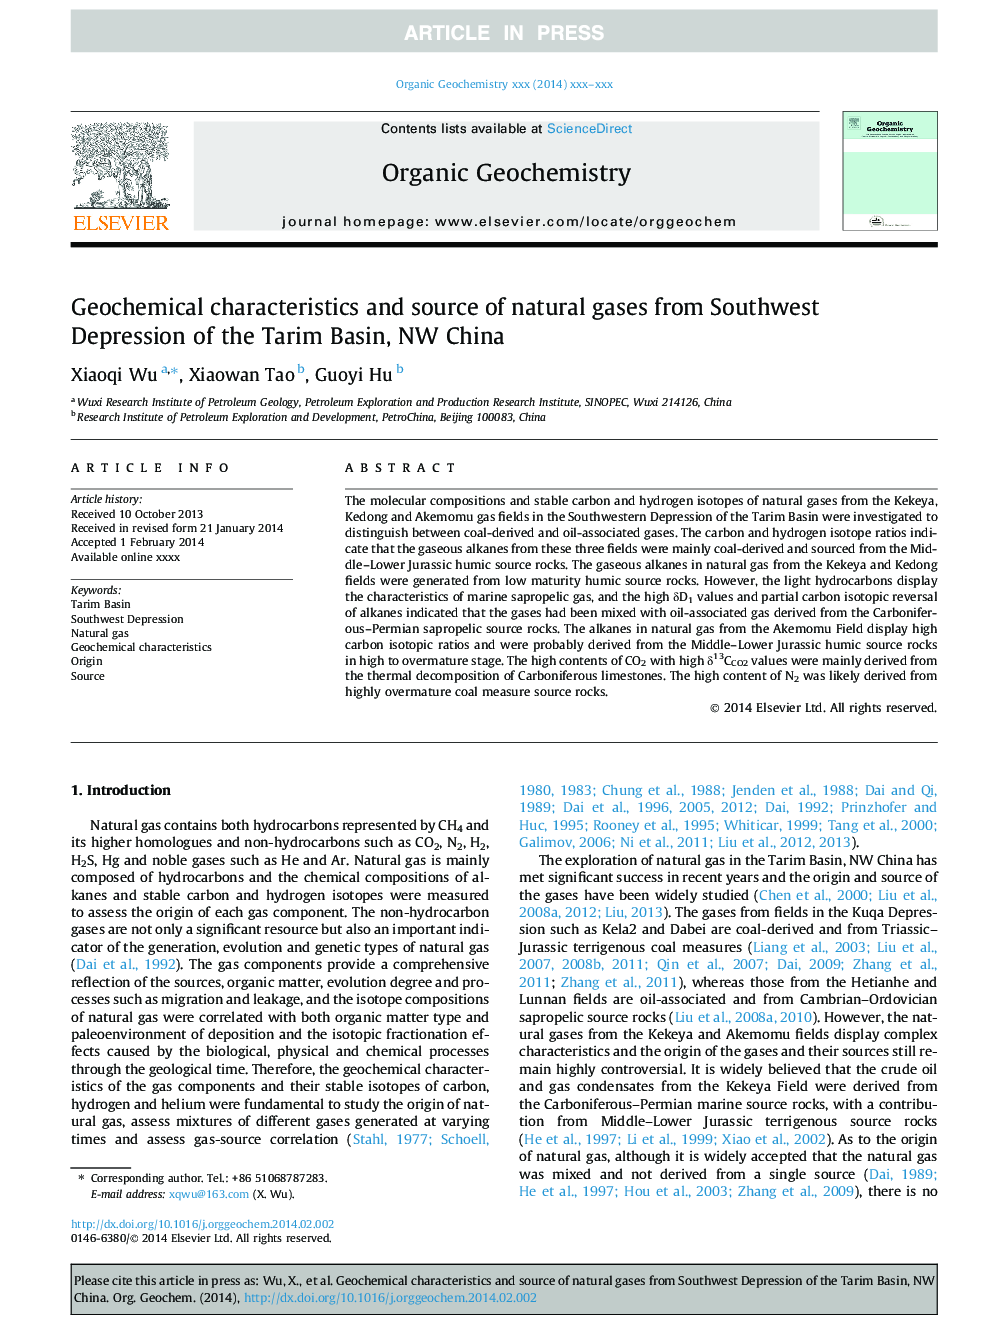 Geochemical characteristics and source of natural gases from Southwest Depression of the Tarim Basin, NW China